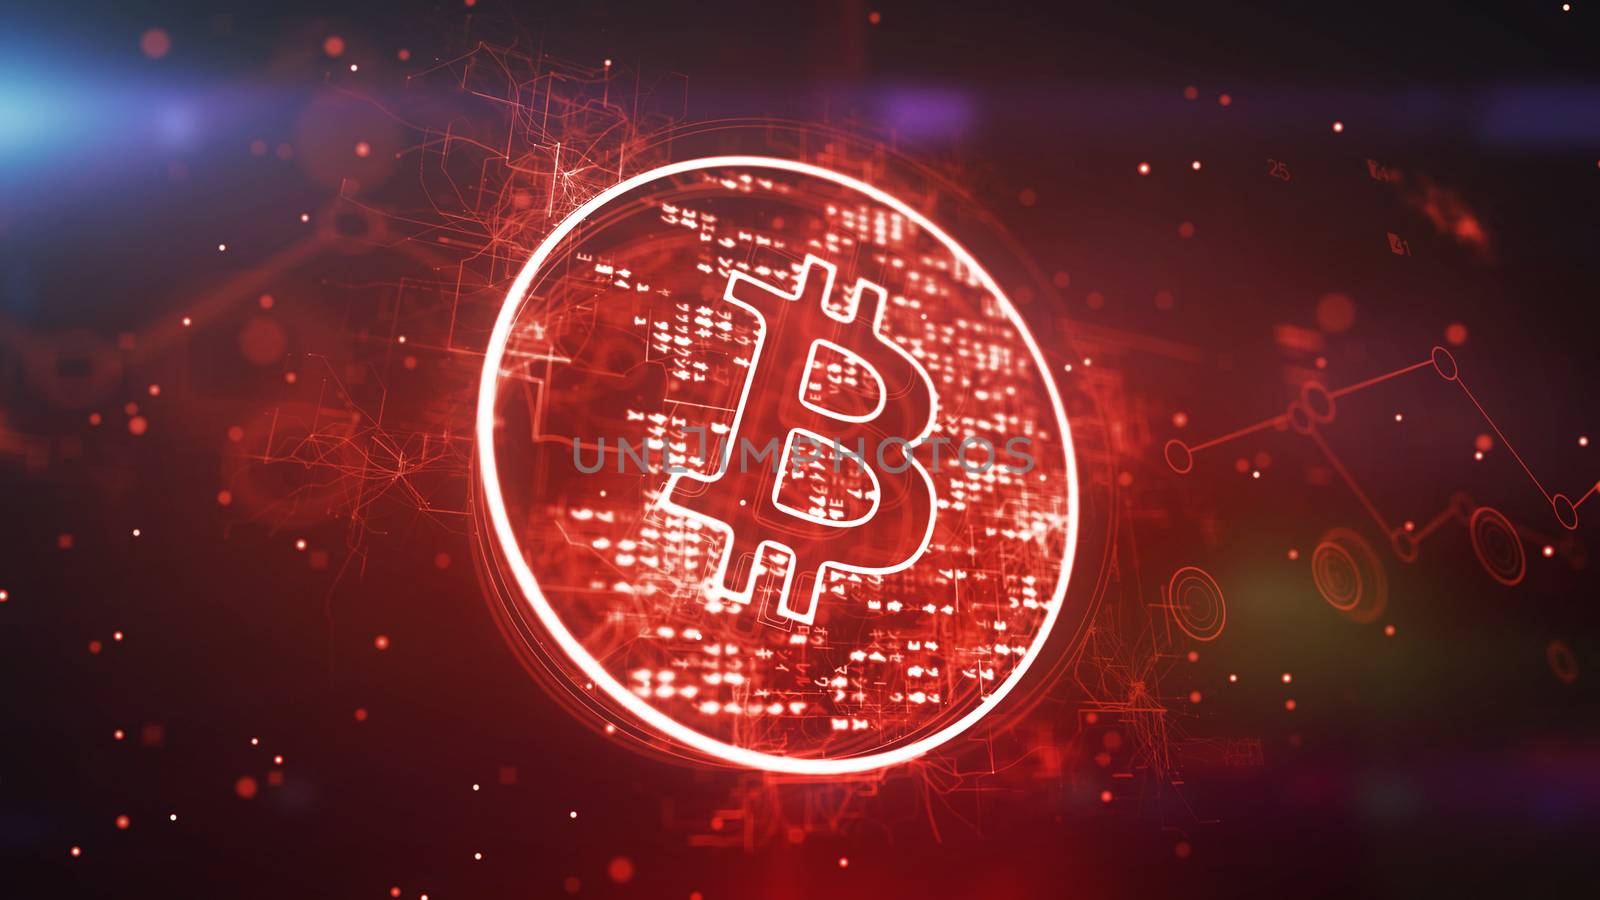 Stunning 3d illustration of a sparkling bitcoin symbol put askew in a red circle with bright pixels in the dark violet background with a cheery crisscross network and circles.